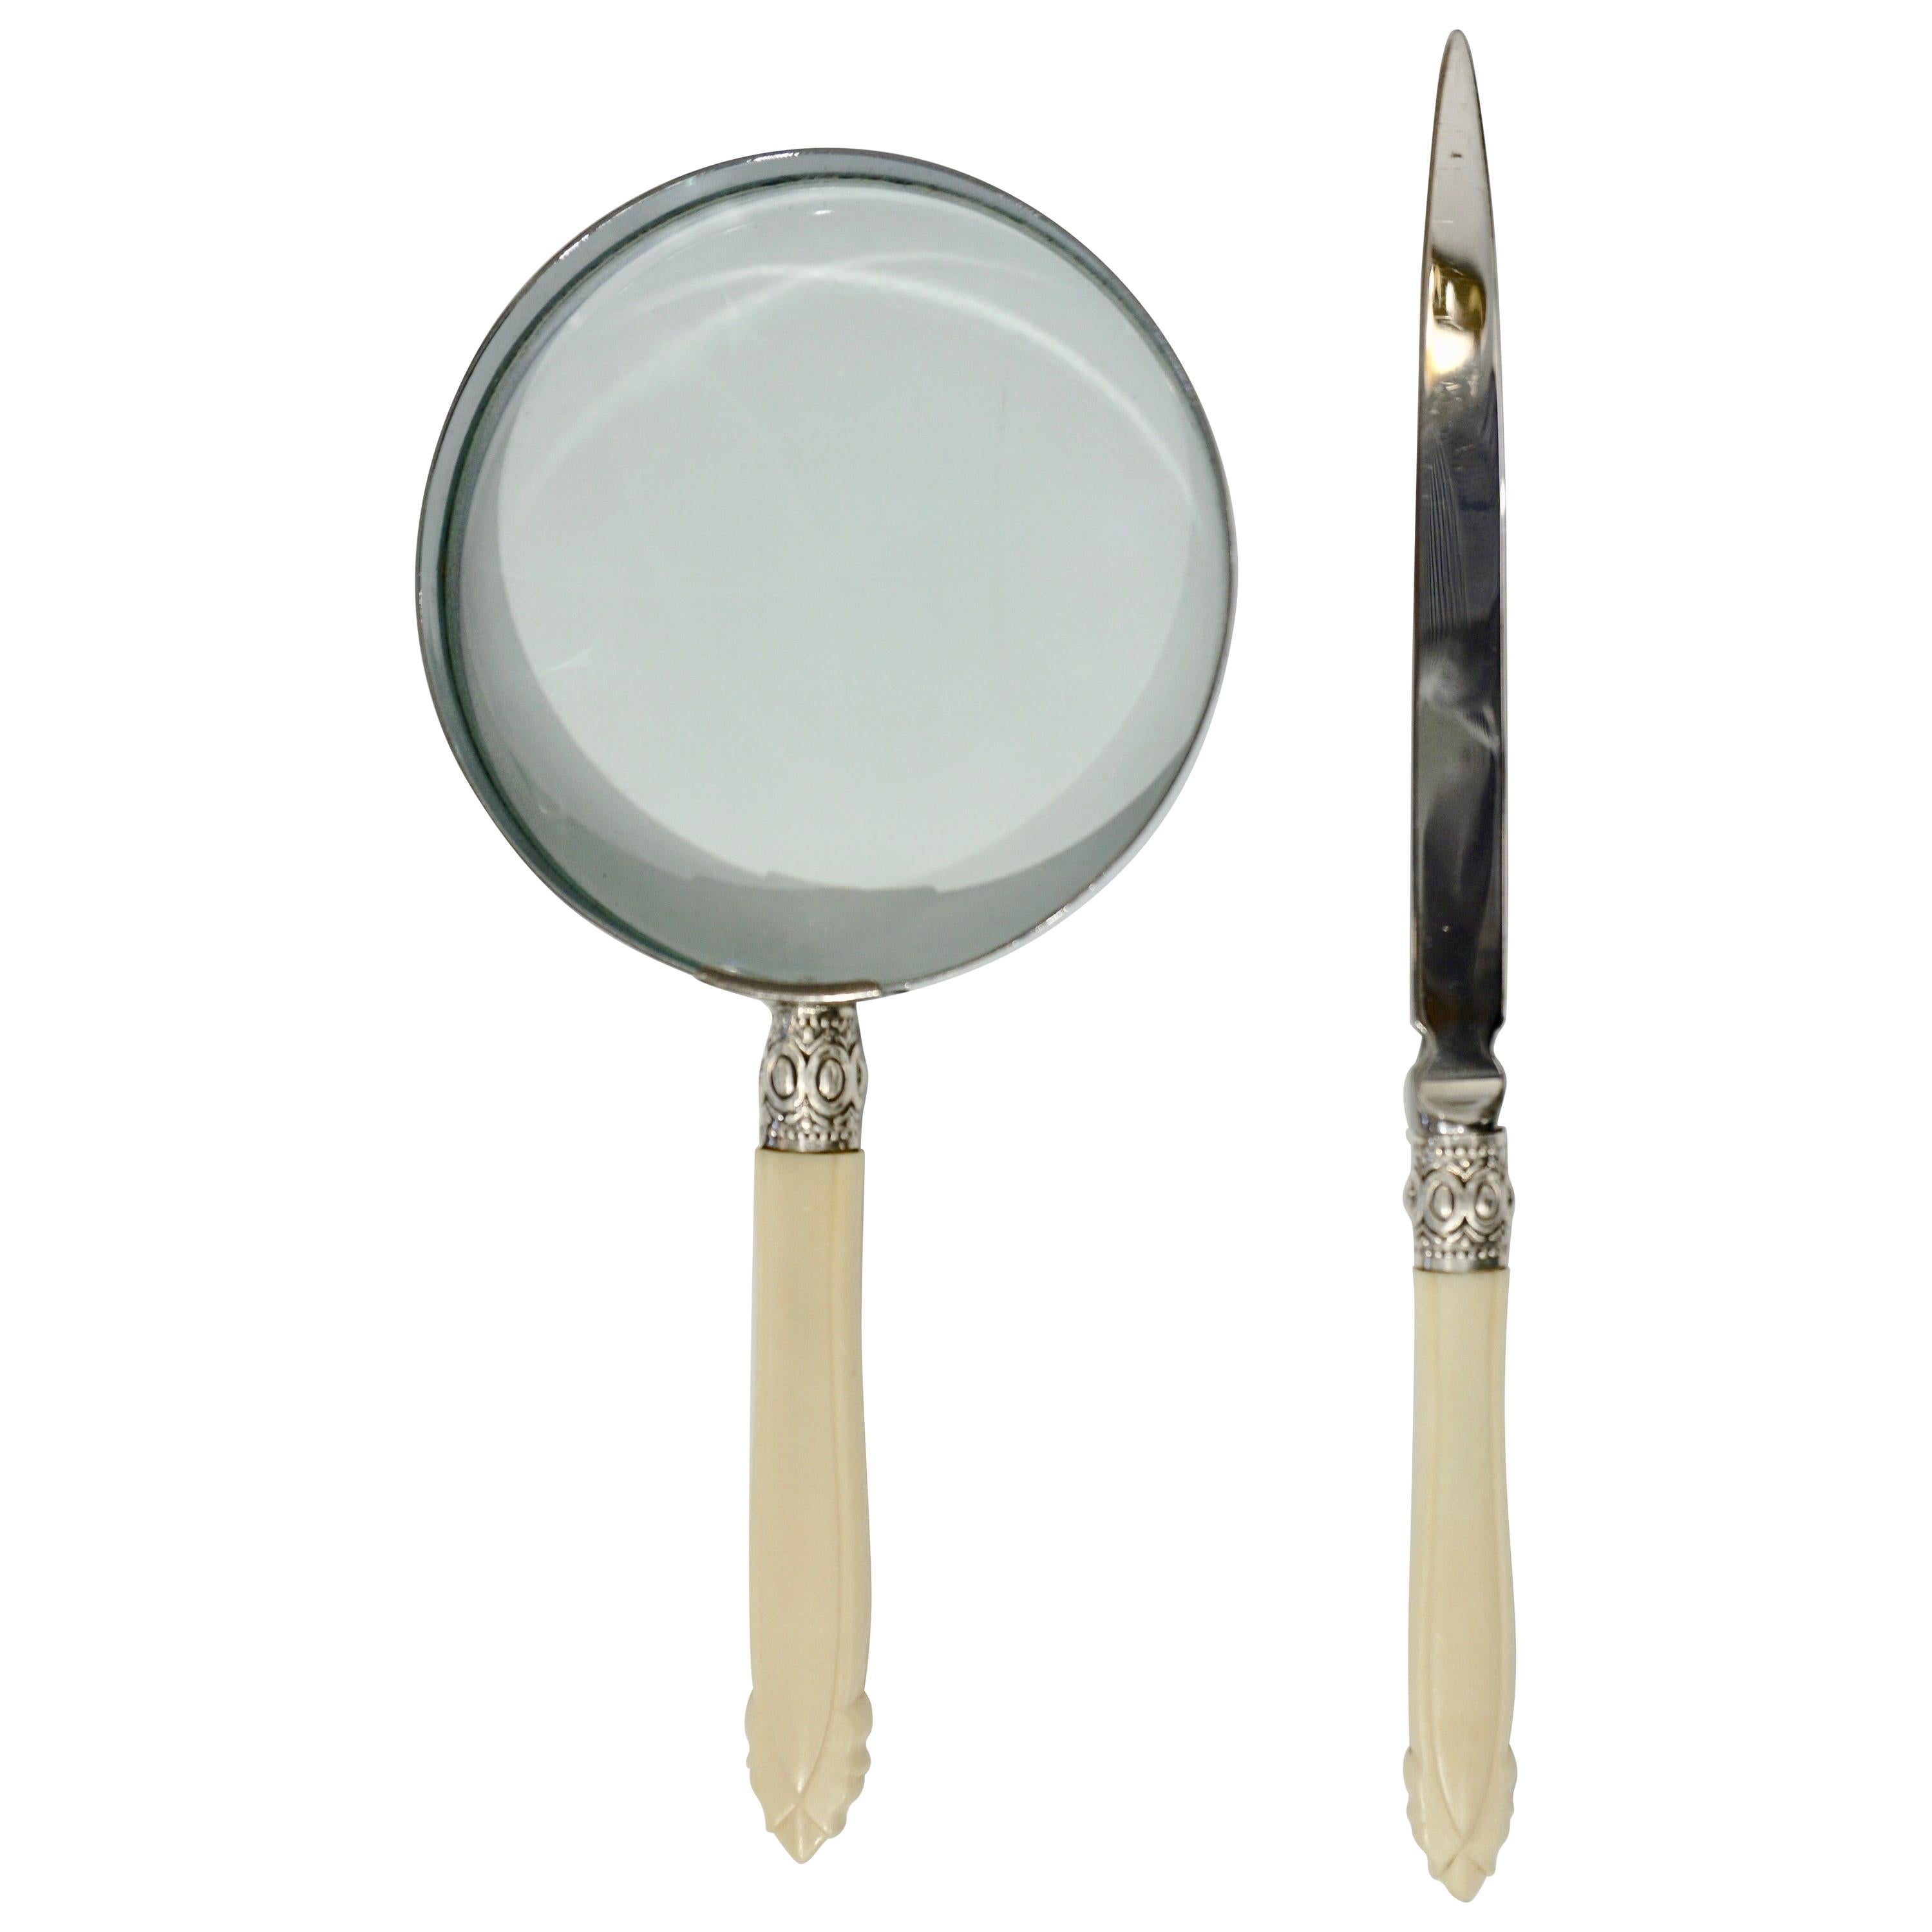 English Magnifying Glass and Letter Opener Desk Set with Horn Handles 1970s